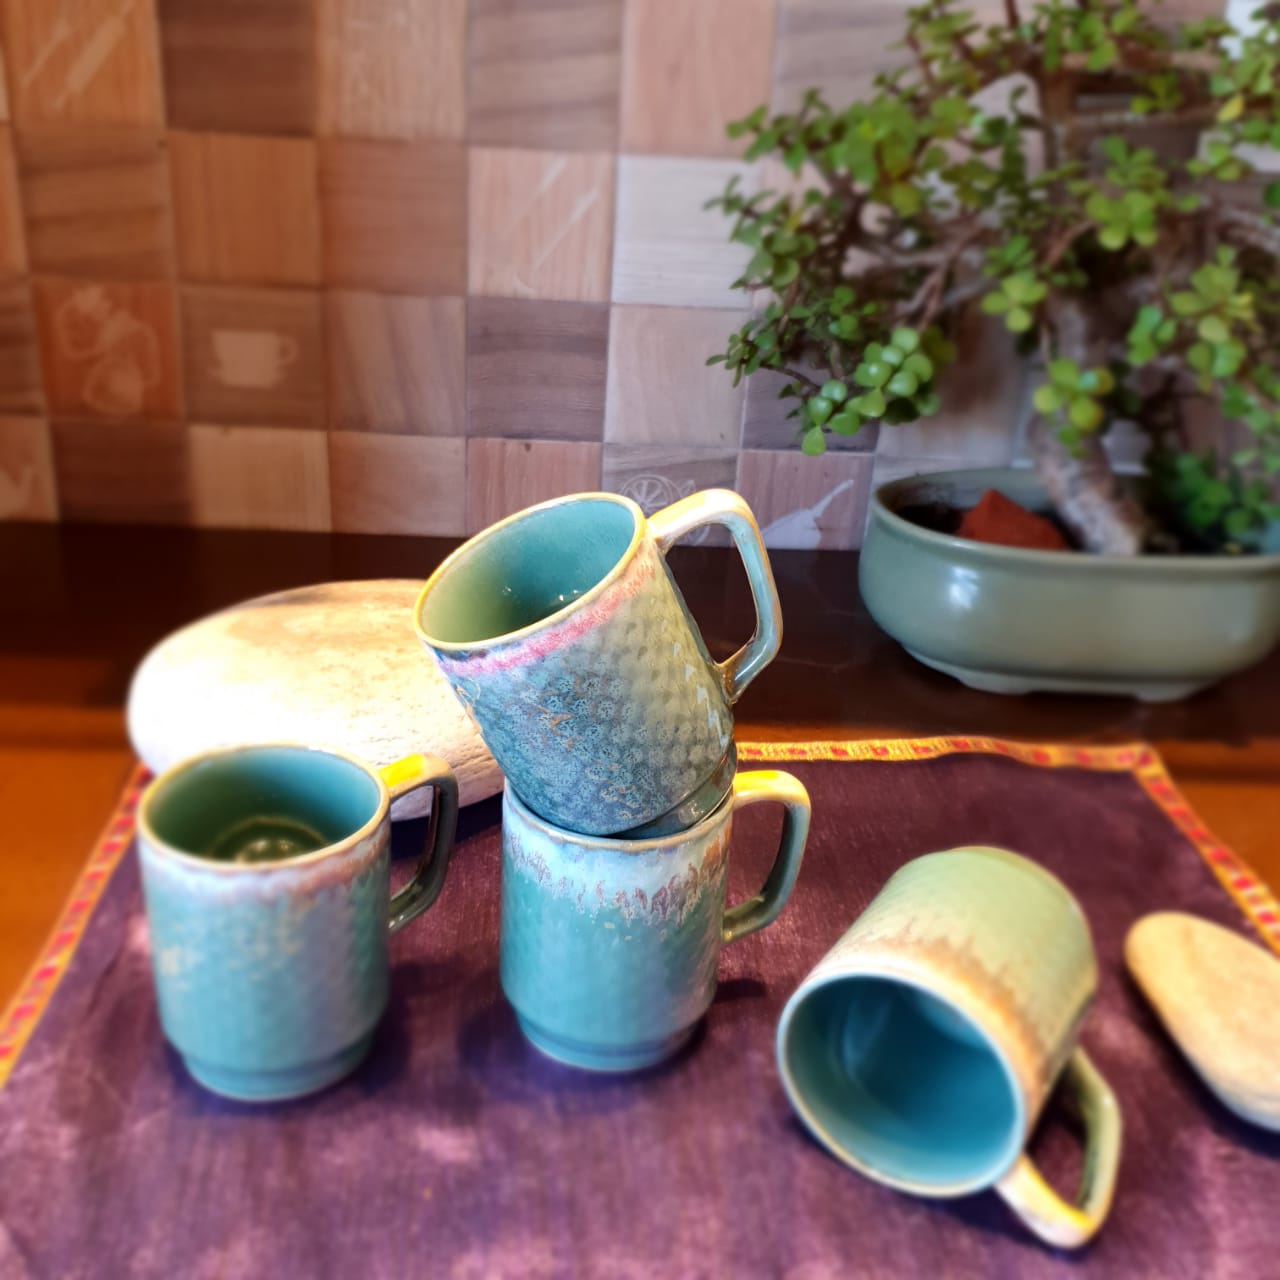 Turquoise Ceramic Mugs with Yellow and Pink Tints, Set of 4, Coffee and Tea Mugs, Soup Mugs 170 Ml Each, Set of 4 Tea Cups